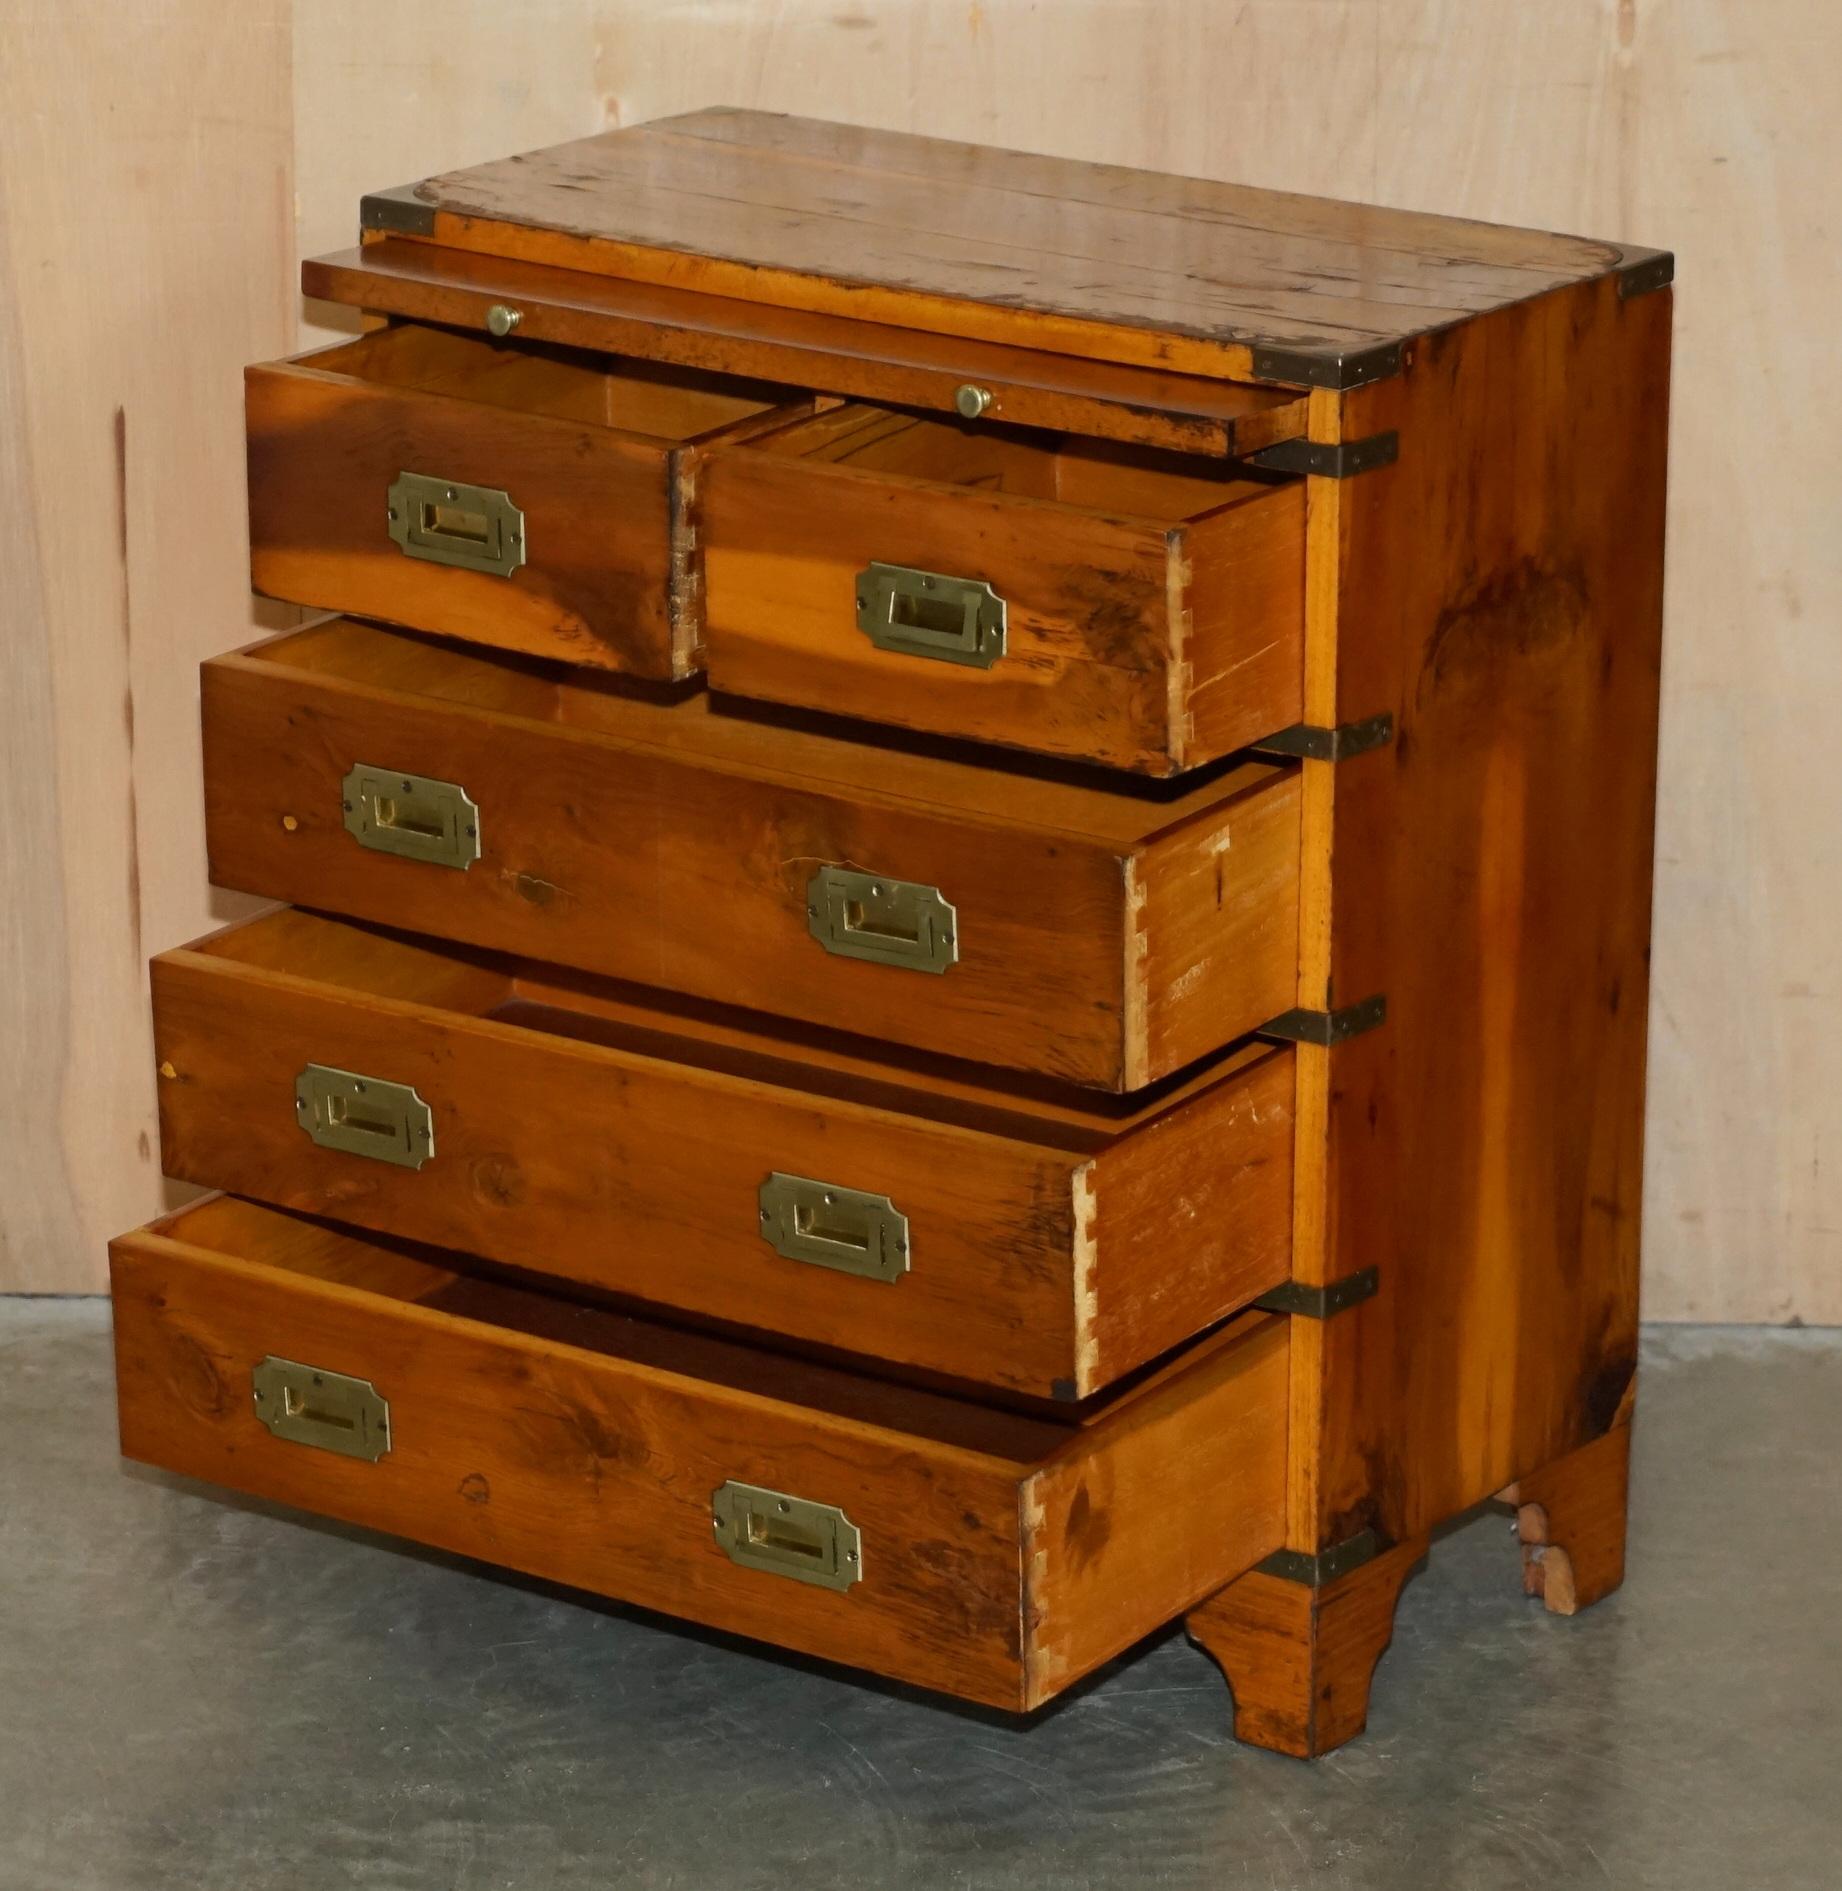 PAIR OF DISTRESSED MILITARY CAMPAIGN BURR YEW WOOD SIDE TABLES WiTH DRAWERS TRAY For Sale 4